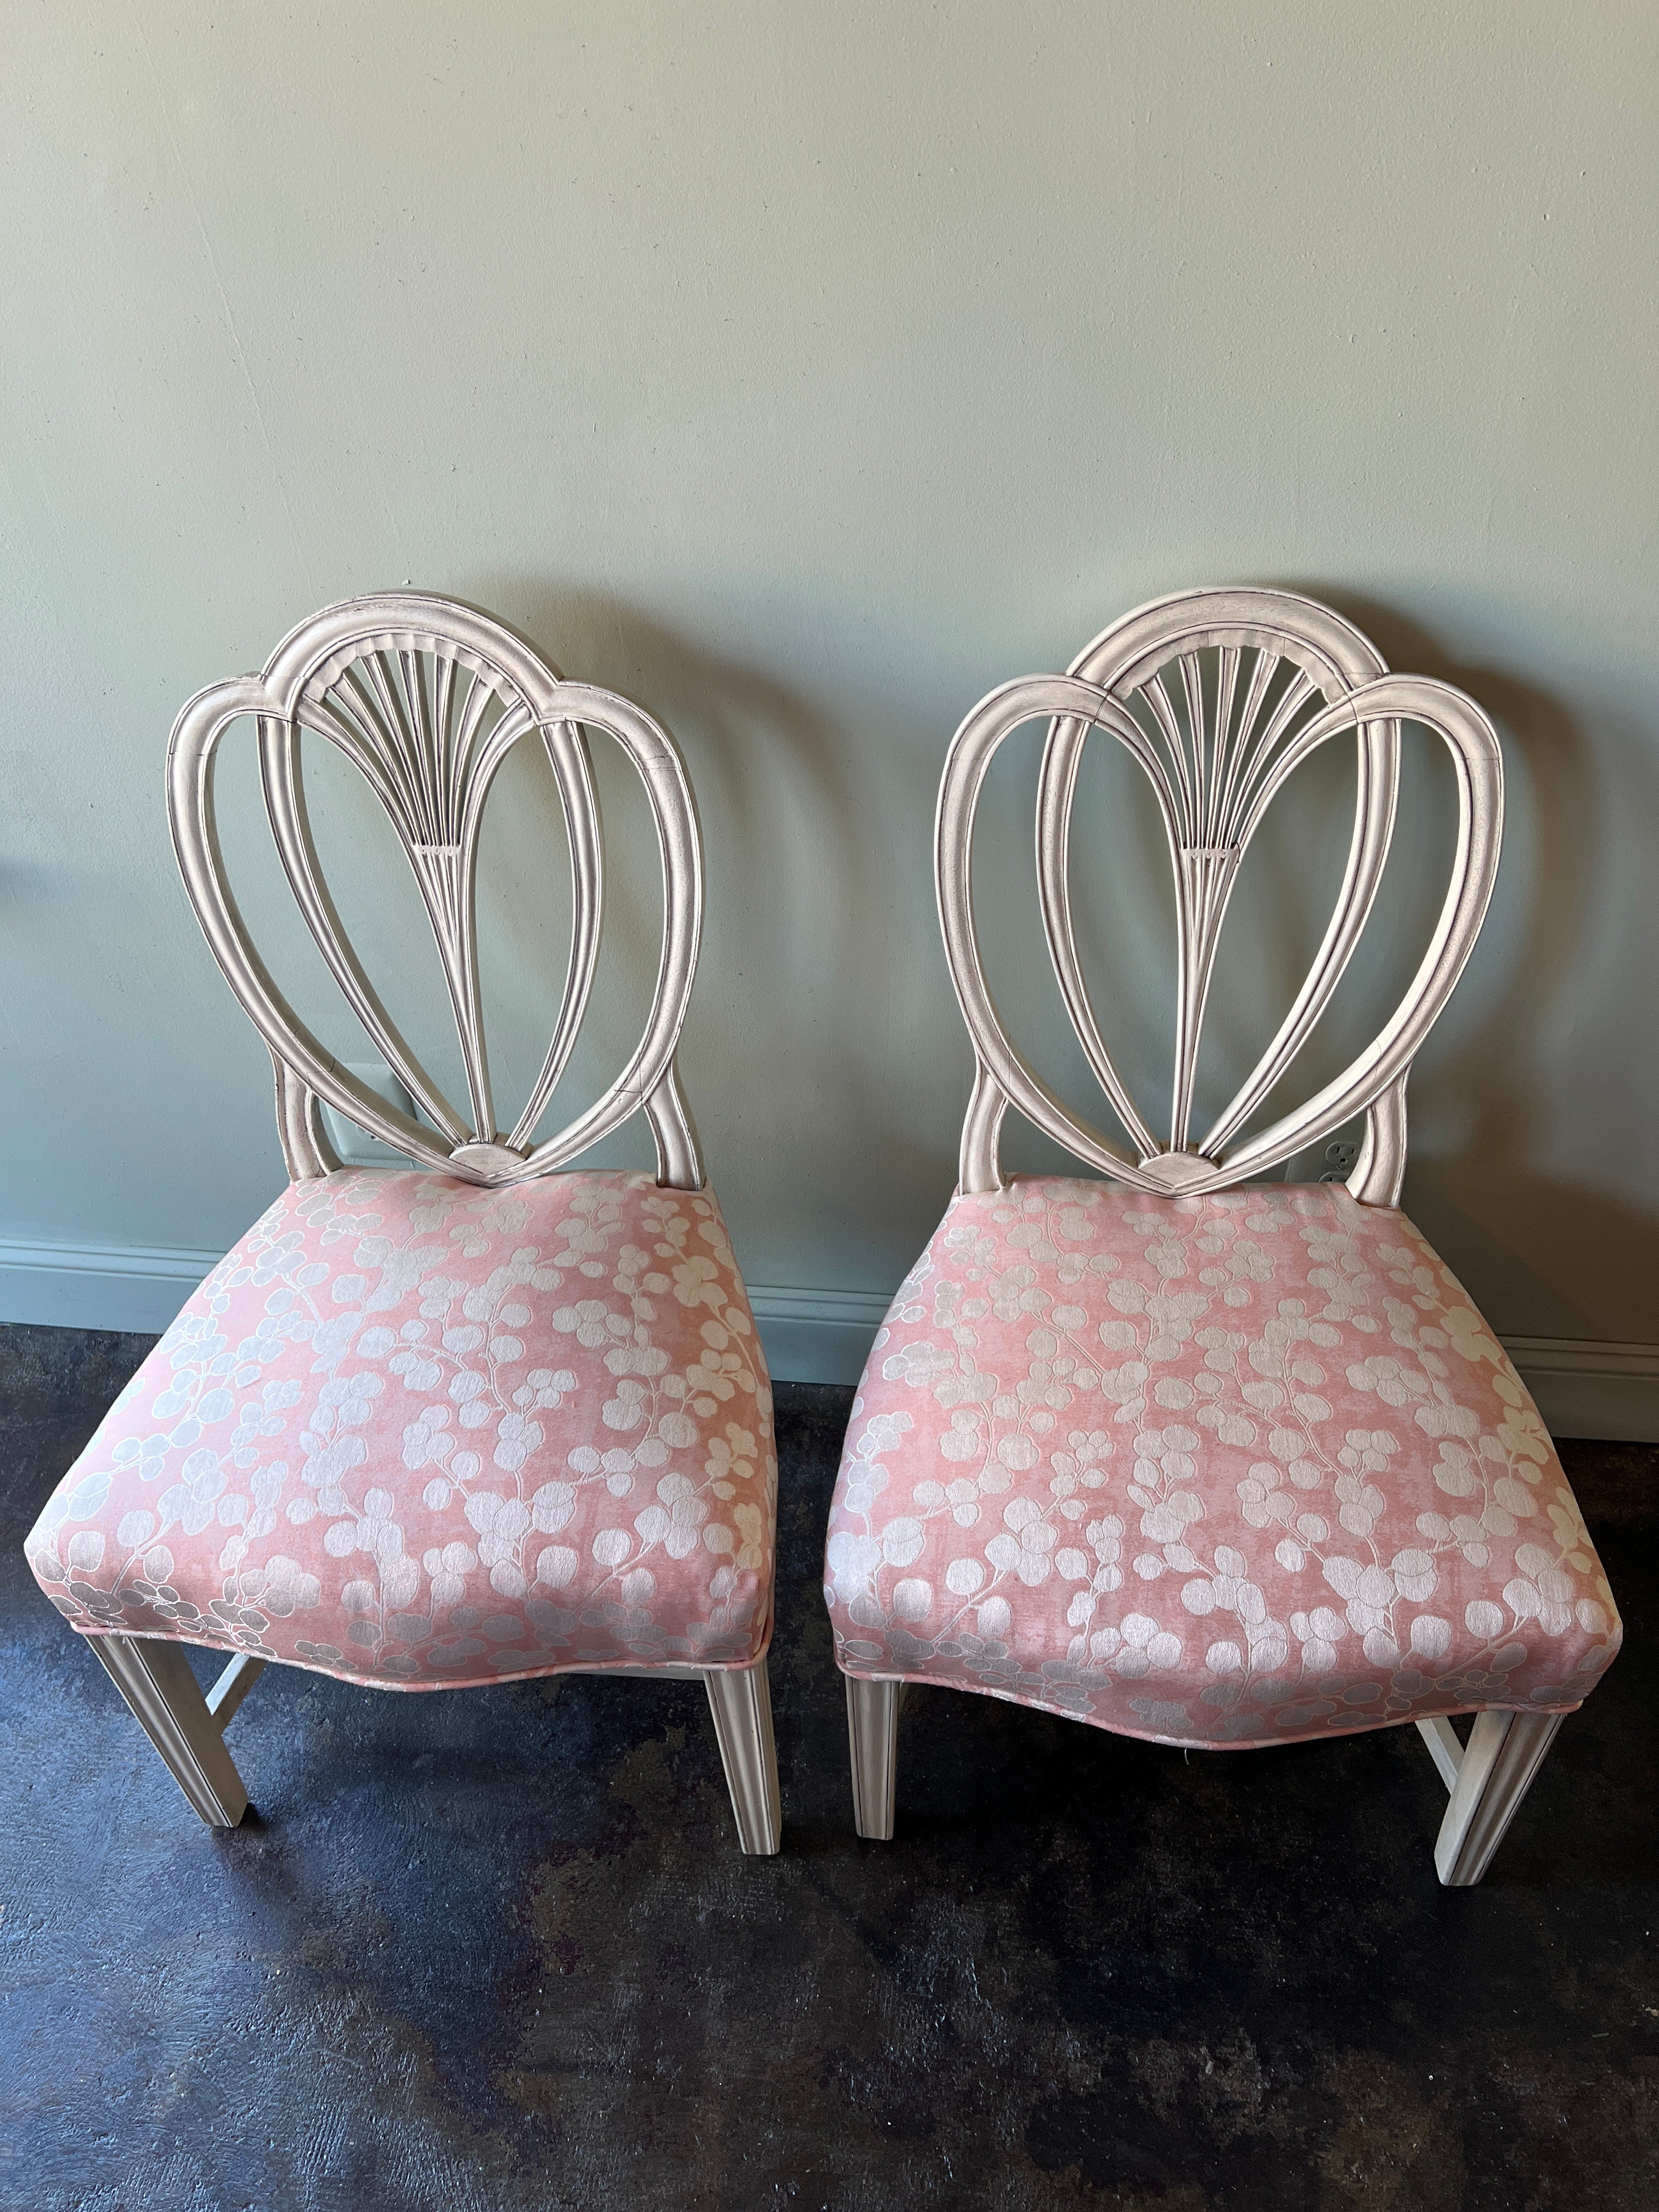 Pair of mahogany wood side chairs with balloon backs. White paint and hand glazing. Re-upholstered seats.

Most likely Philadelphia Circa 1790-1810.
   